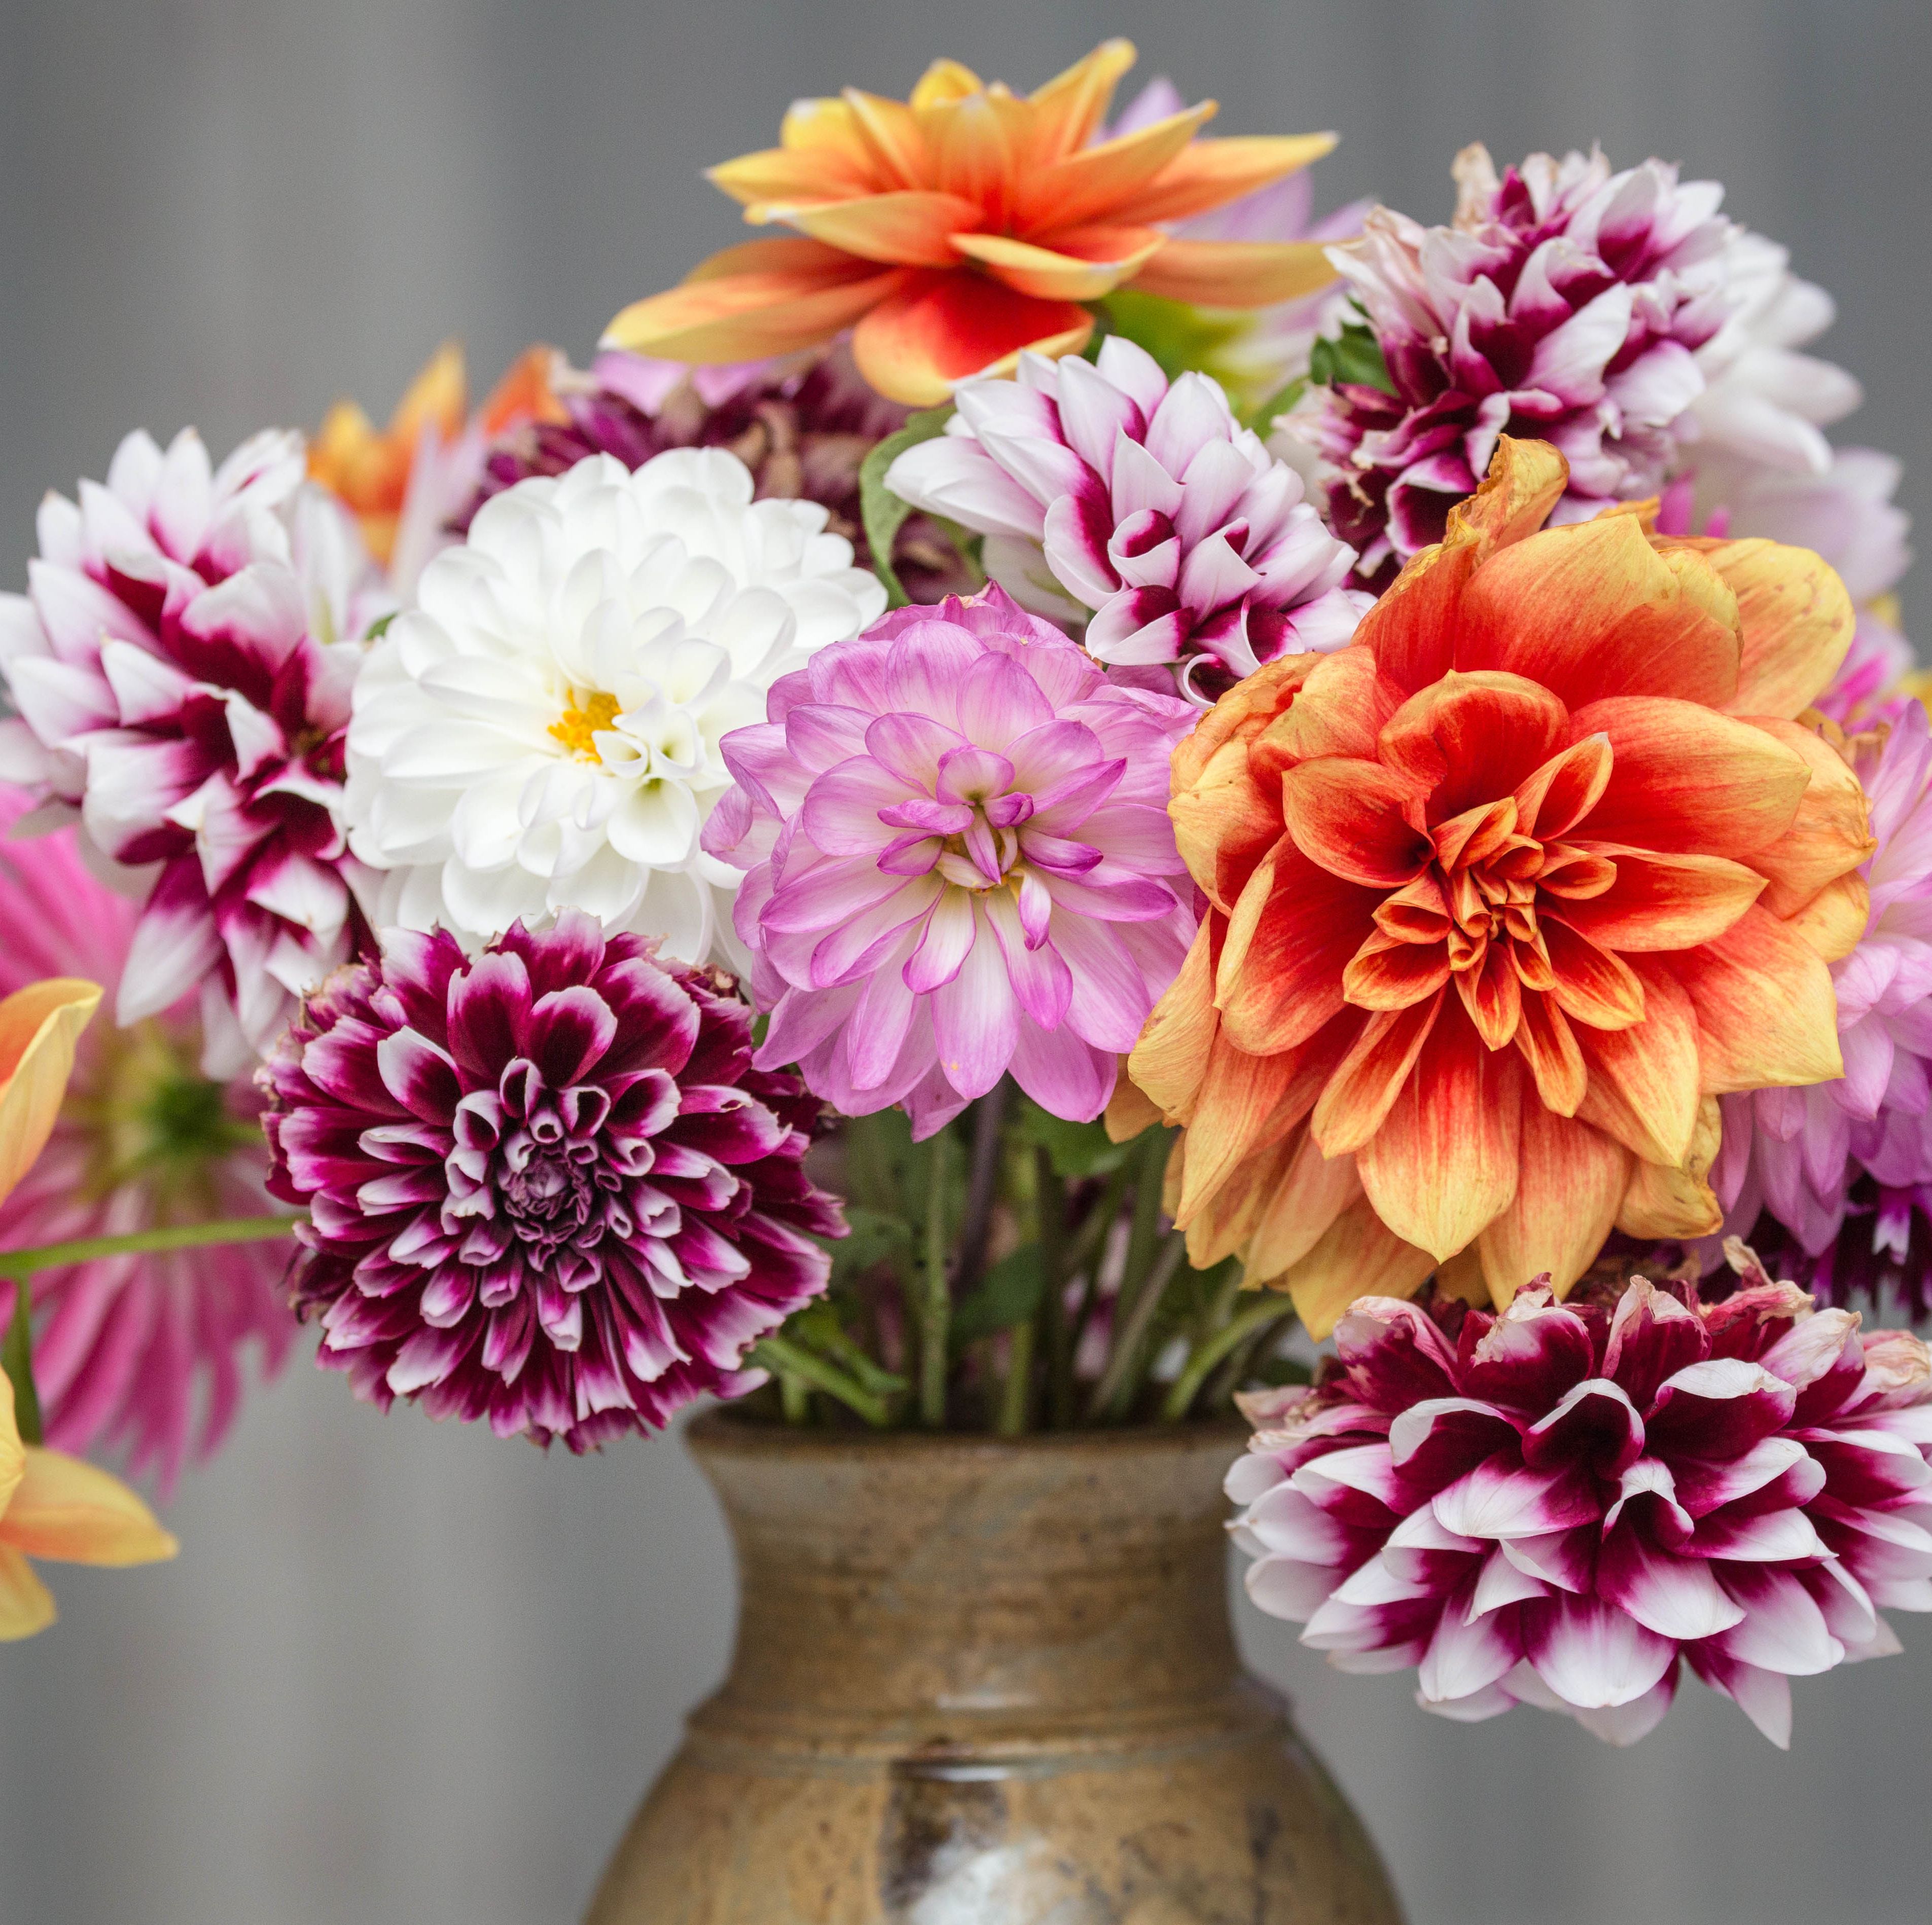 Now Is the Time to Get Your Mother's Day Flowers